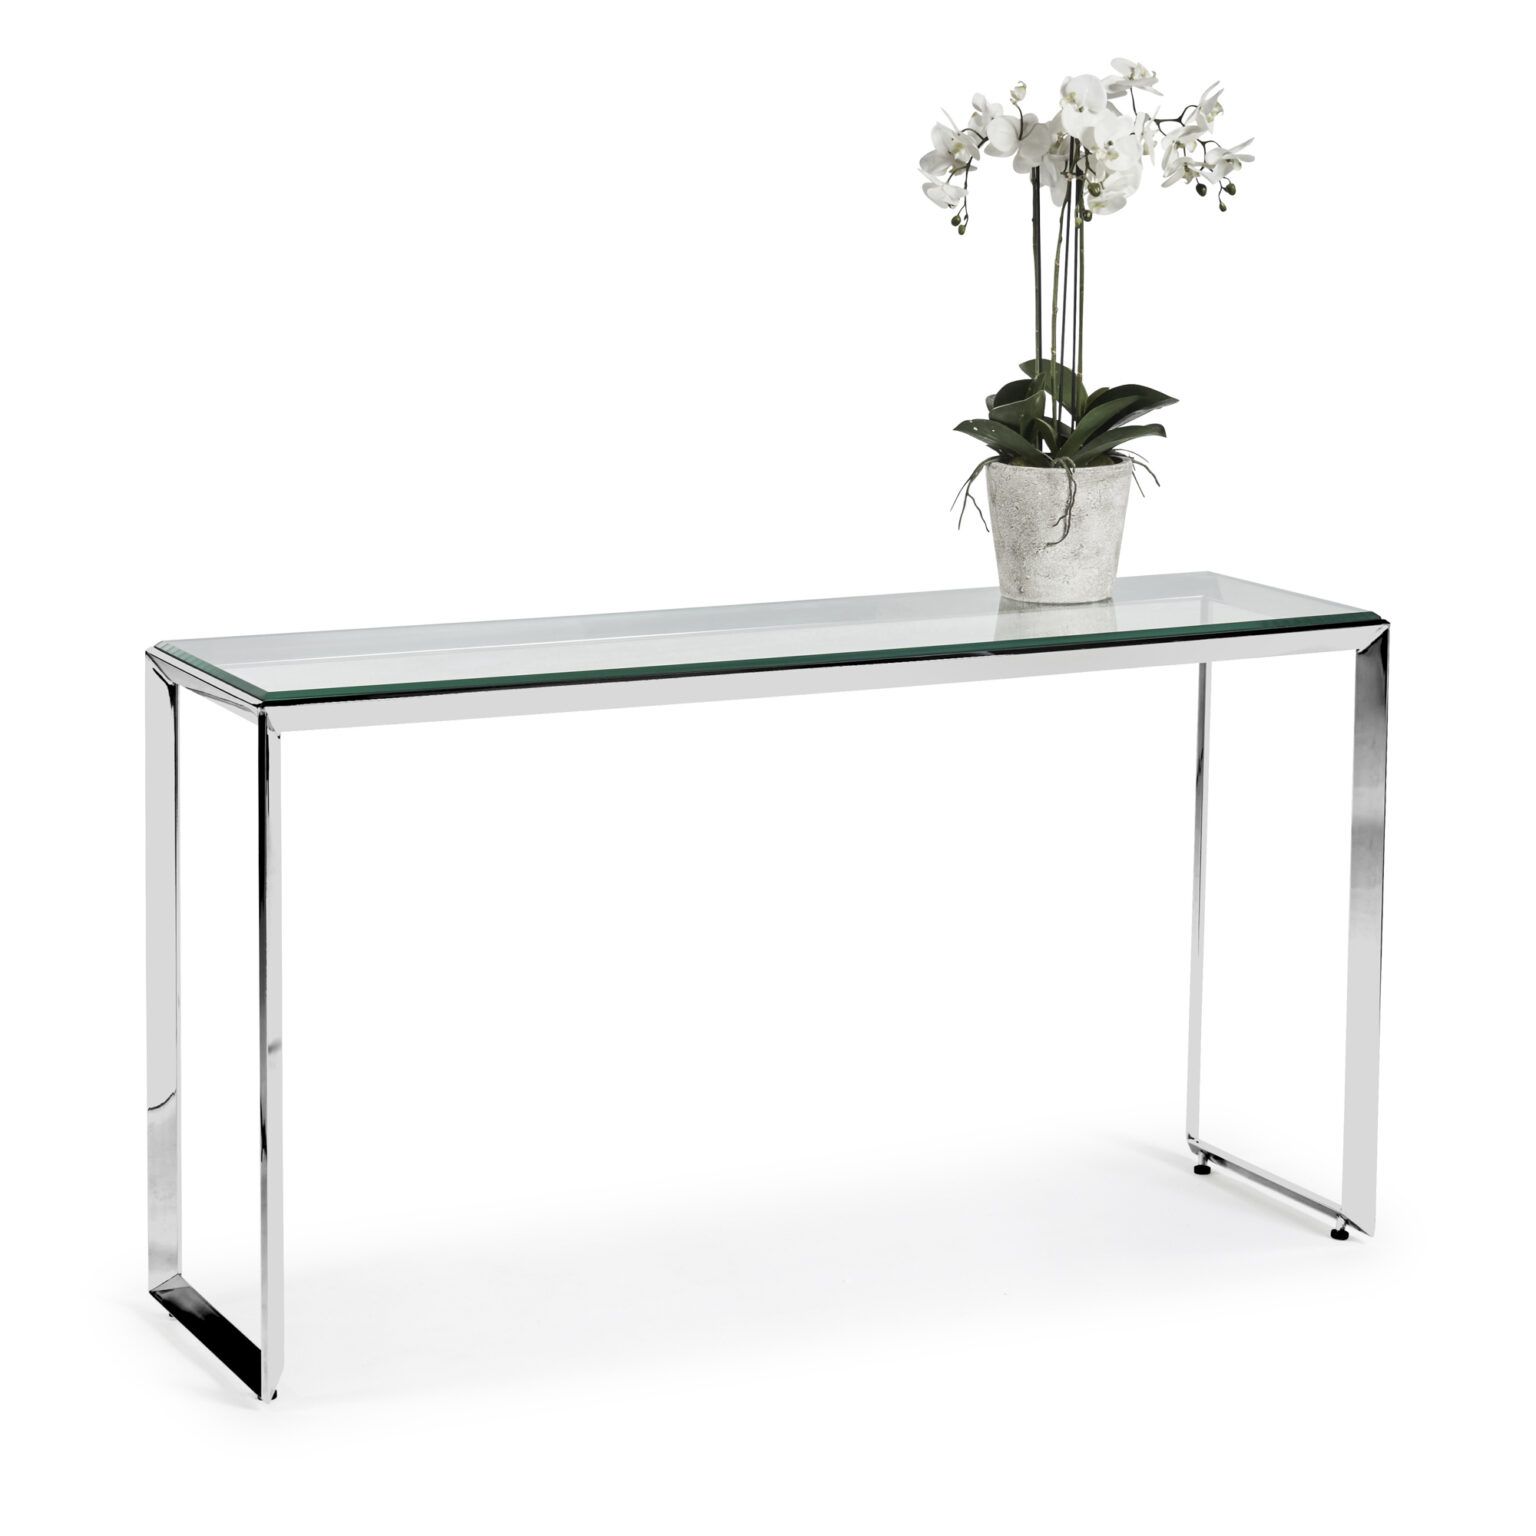 Small Glass Console Table With Polished Stainless Steel Regarding Glass And Stainless Steel Console Tables (View 7 of 20)